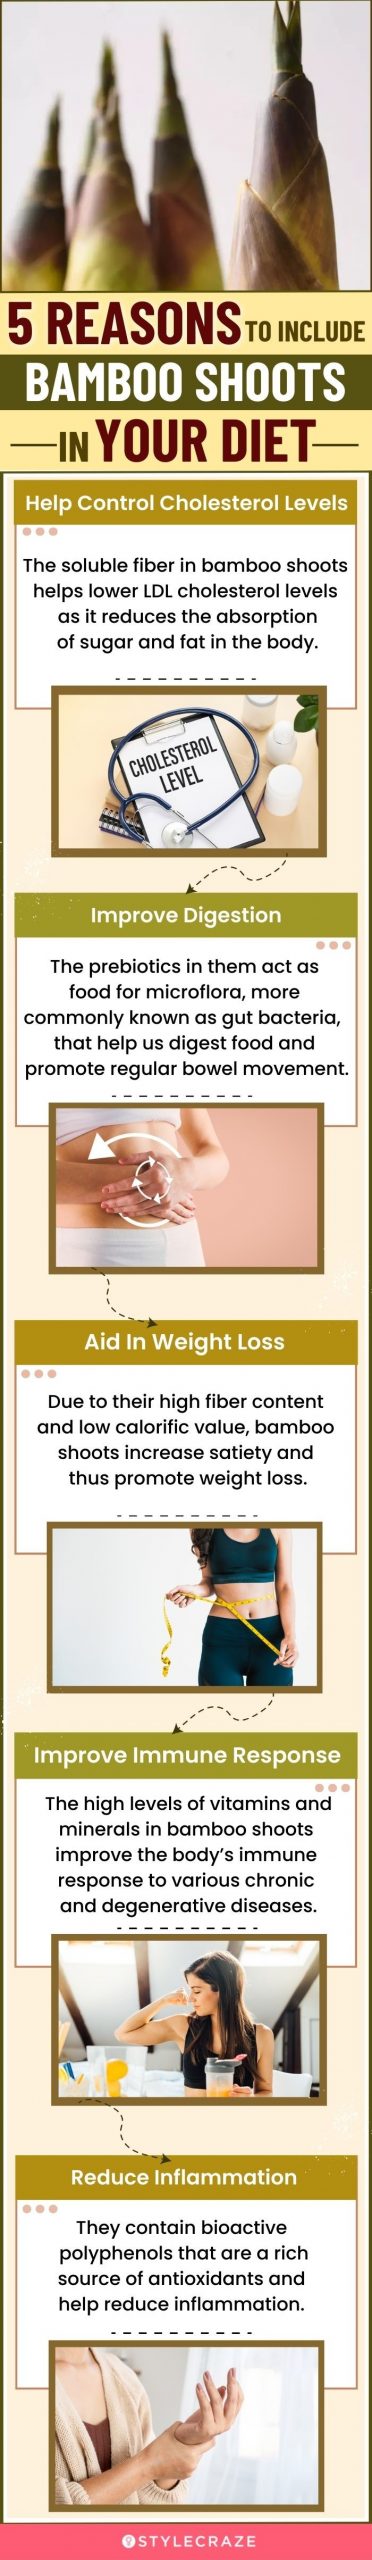 5 reasons to include bamboo shoots in your diet (infographic)